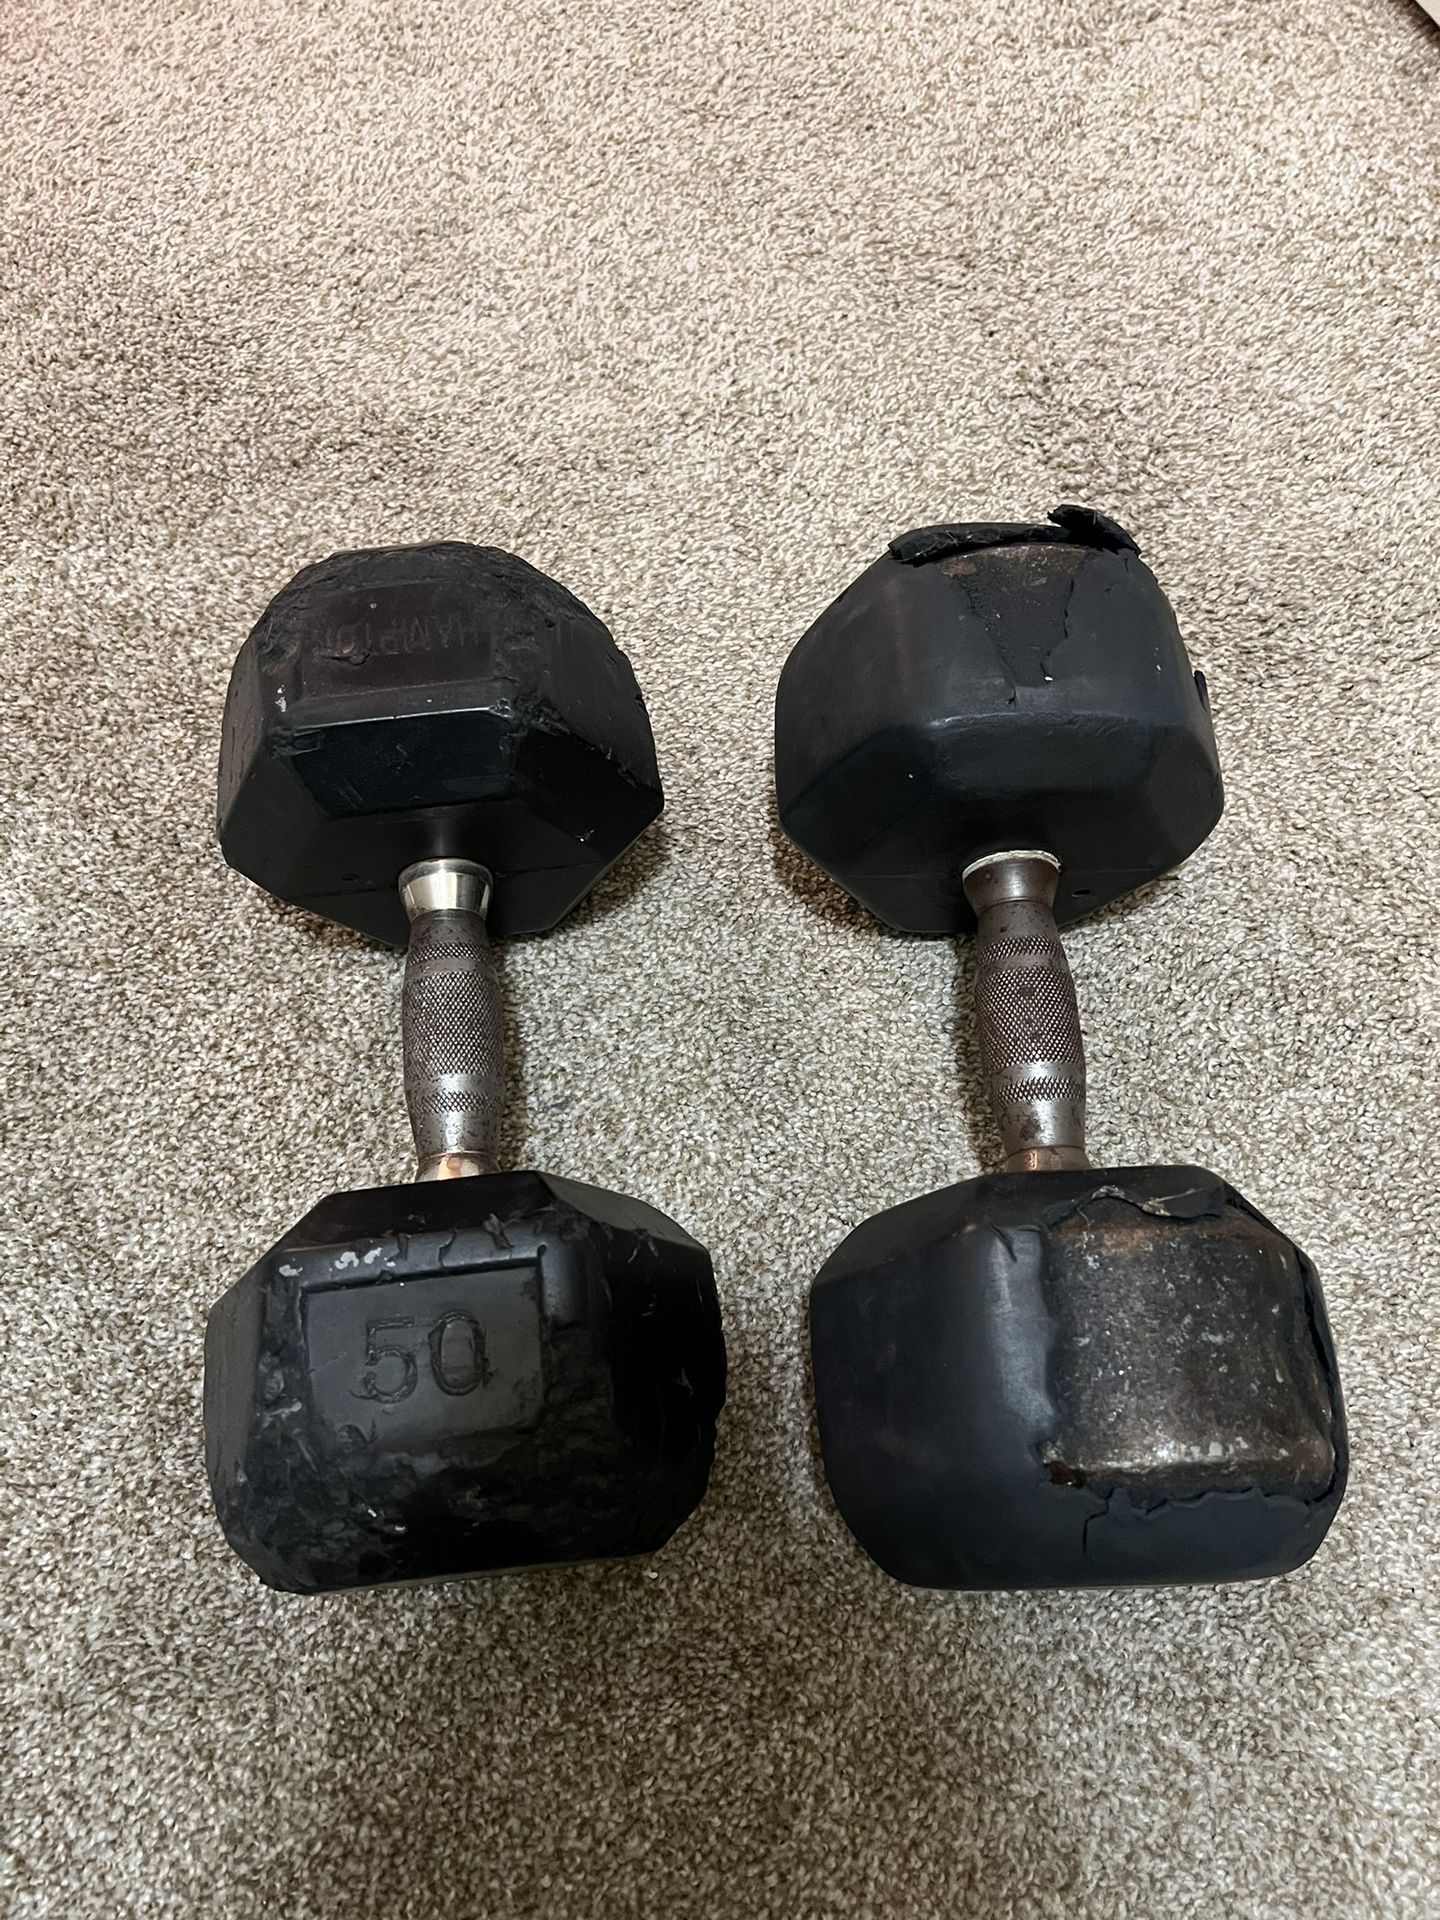 Pair of 50 Pound Dumbbells 